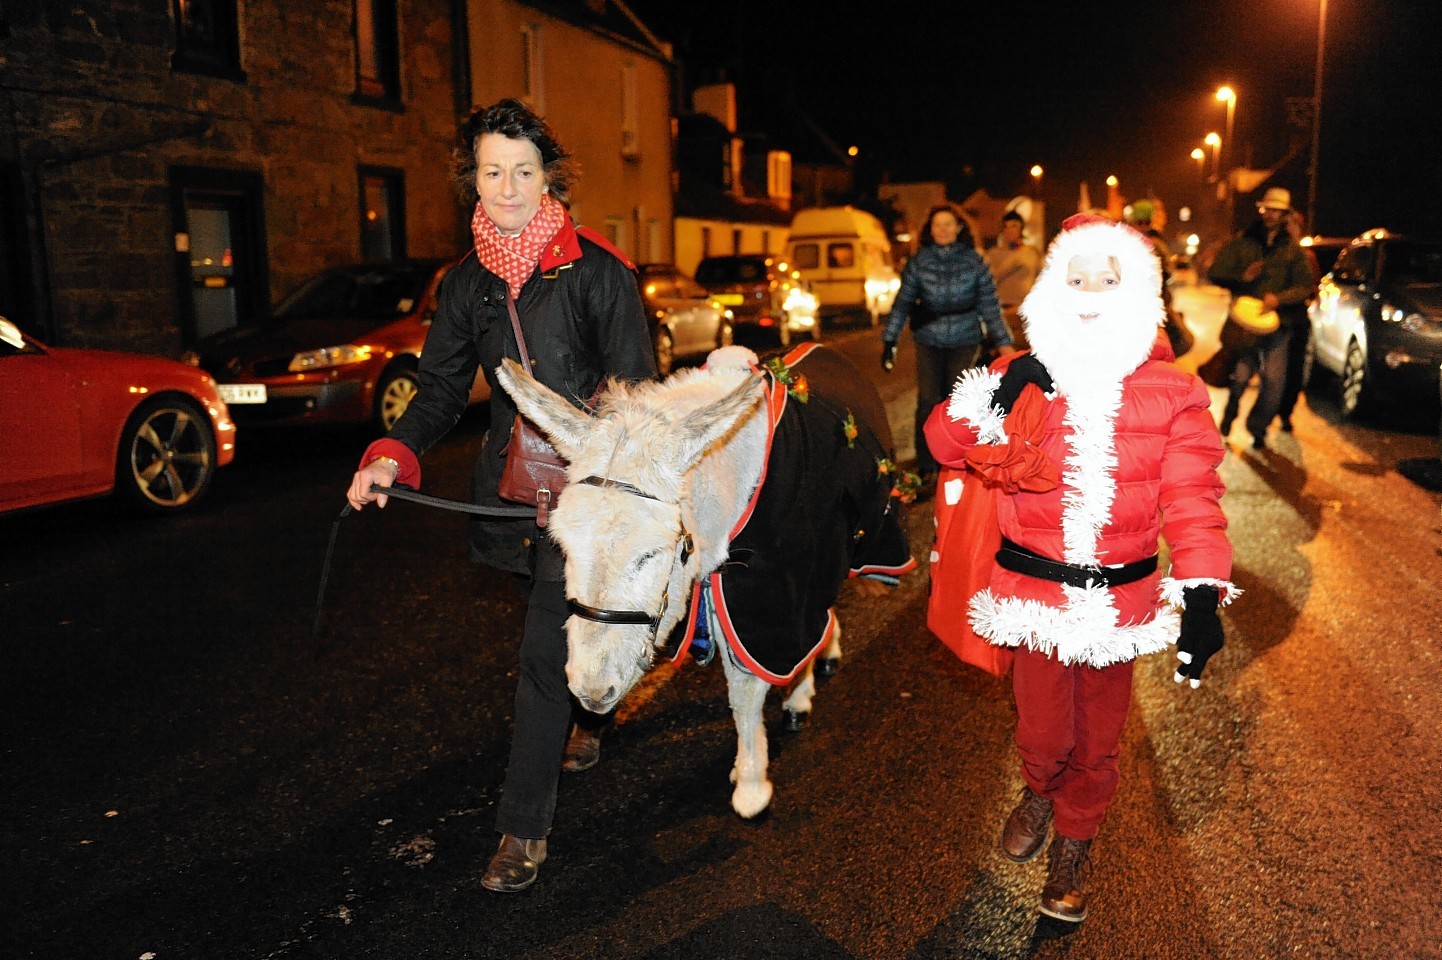 Even Santa paid a visit to Stonehaven.